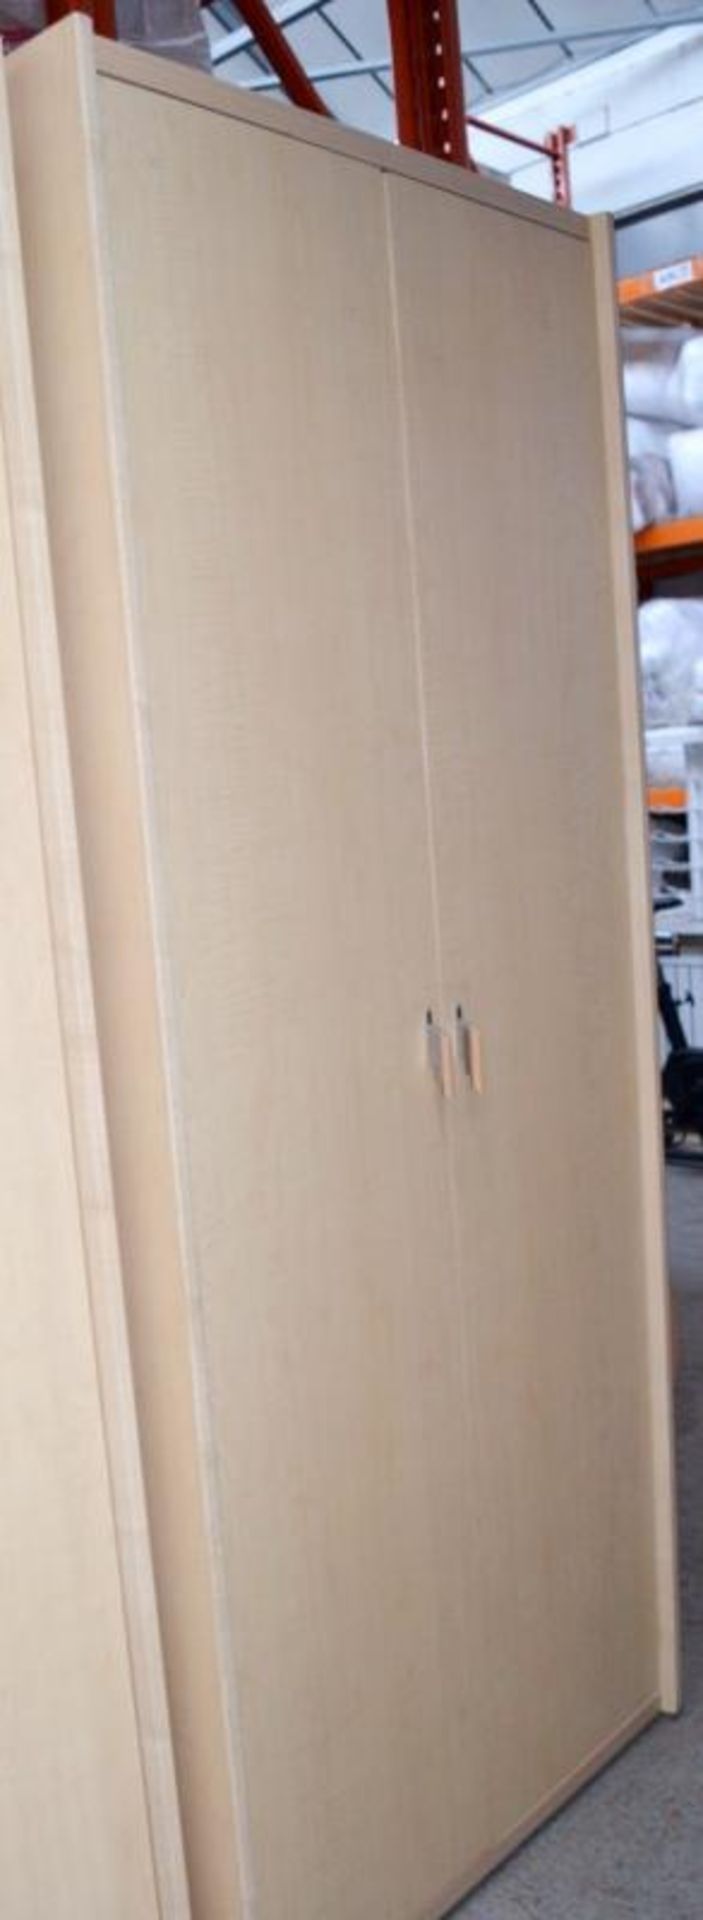 1 x GAUTIER Tall Wardrobe With A Natural Oak Style Finish - Made In France - Dimensions: H222 x W93. - Image 6 of 7